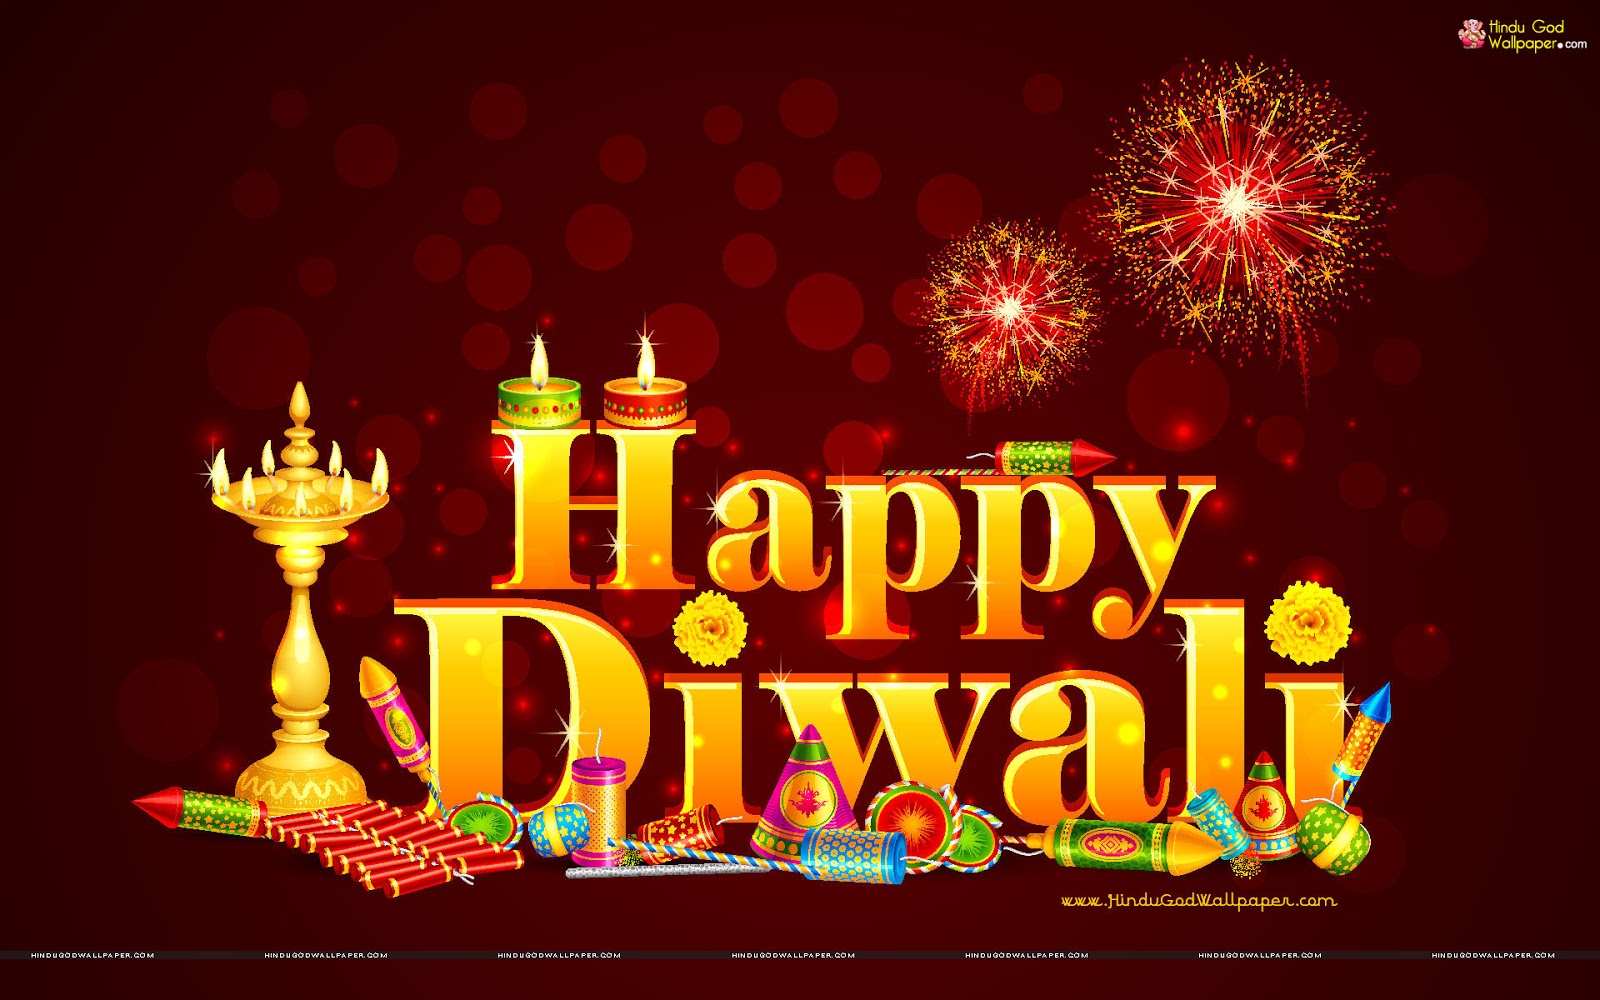 HAPPY DIWALI 2015 IMAGES WISHES QUOTES WALLPAPERS